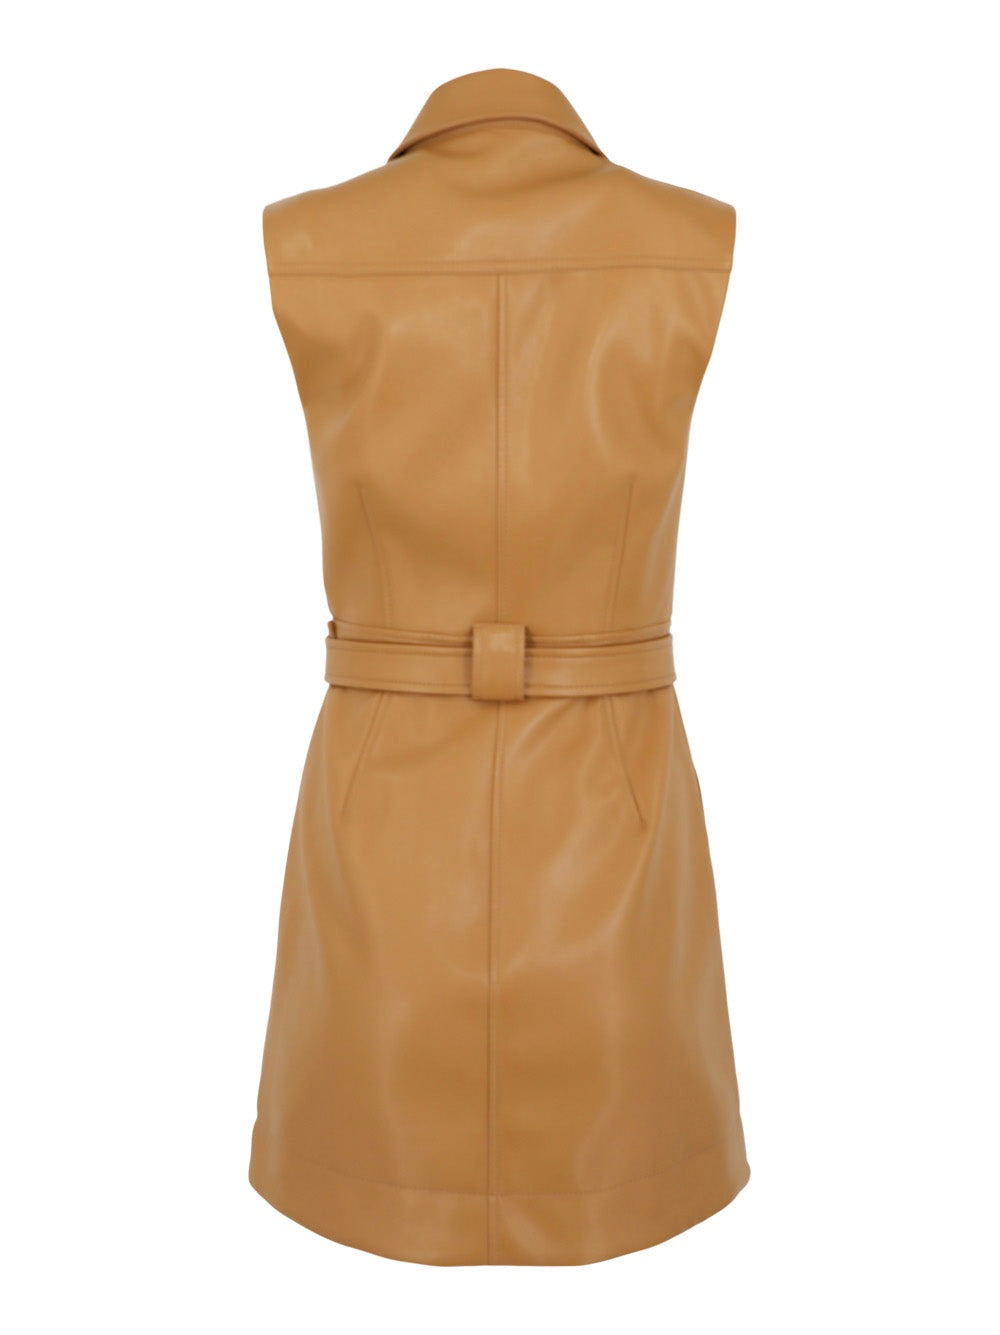 Simkhai Pax Belted Minidress in Hickory